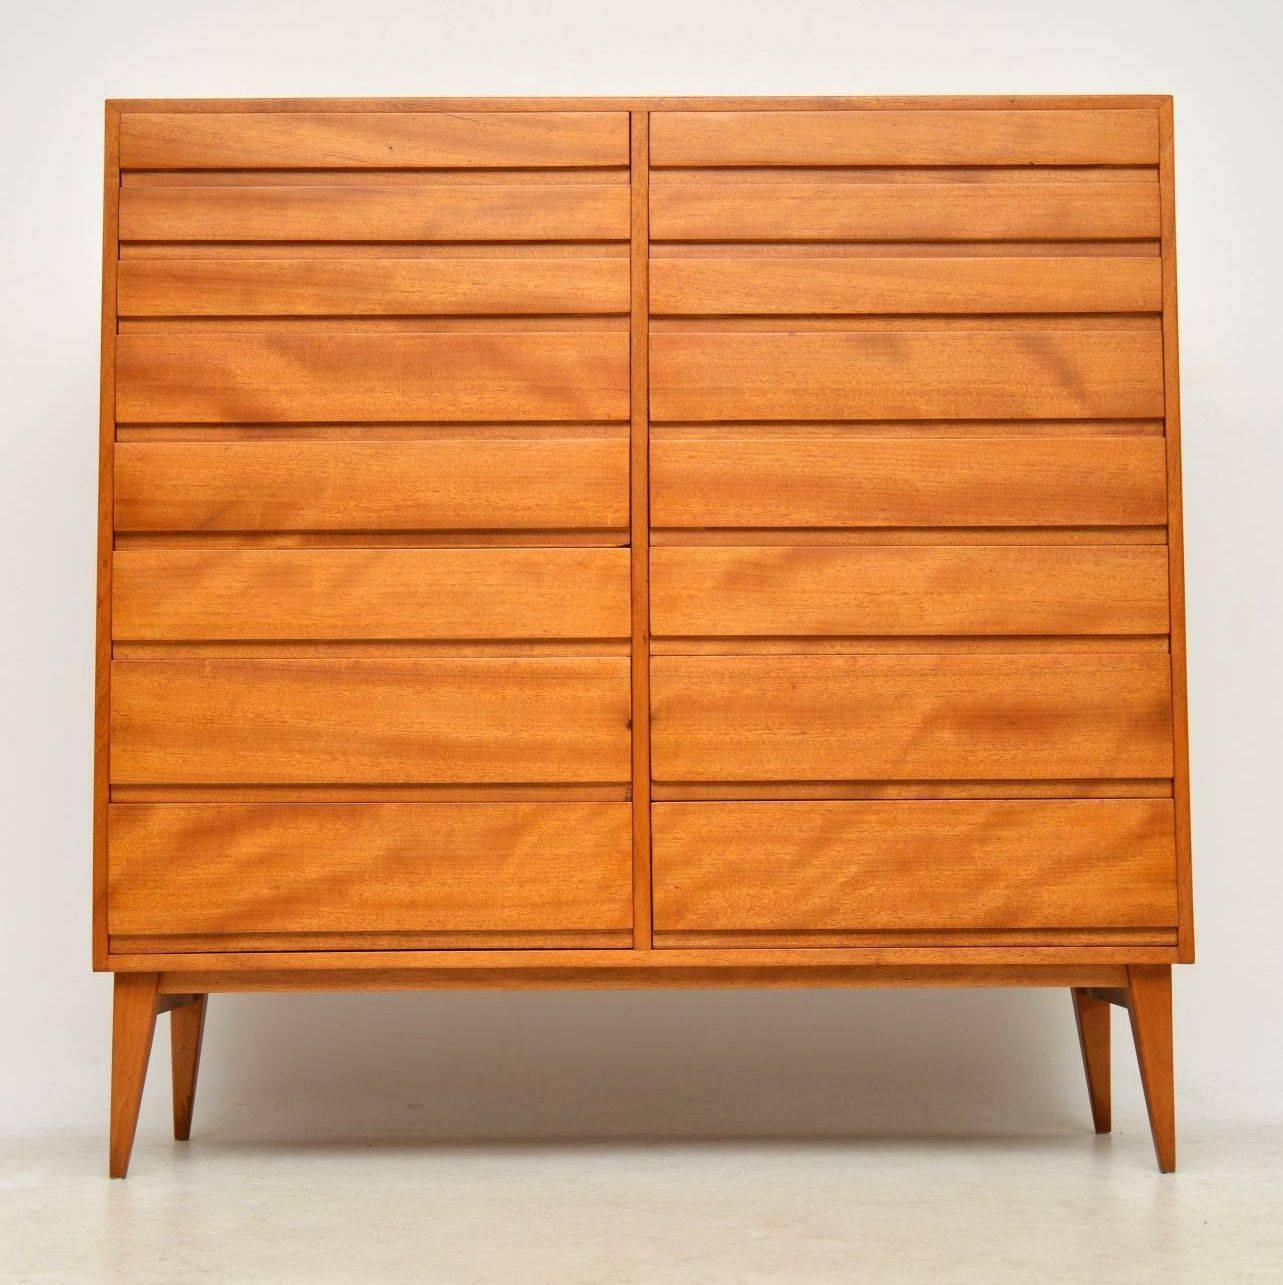 A very large, impressive and stylish chest of drawers, this was made in Sweden and it dates from the 1950s-1960s. It is made from satin wood, we have had it stripped and re-polished to a very high standard, the condition is superb throughout. It’s